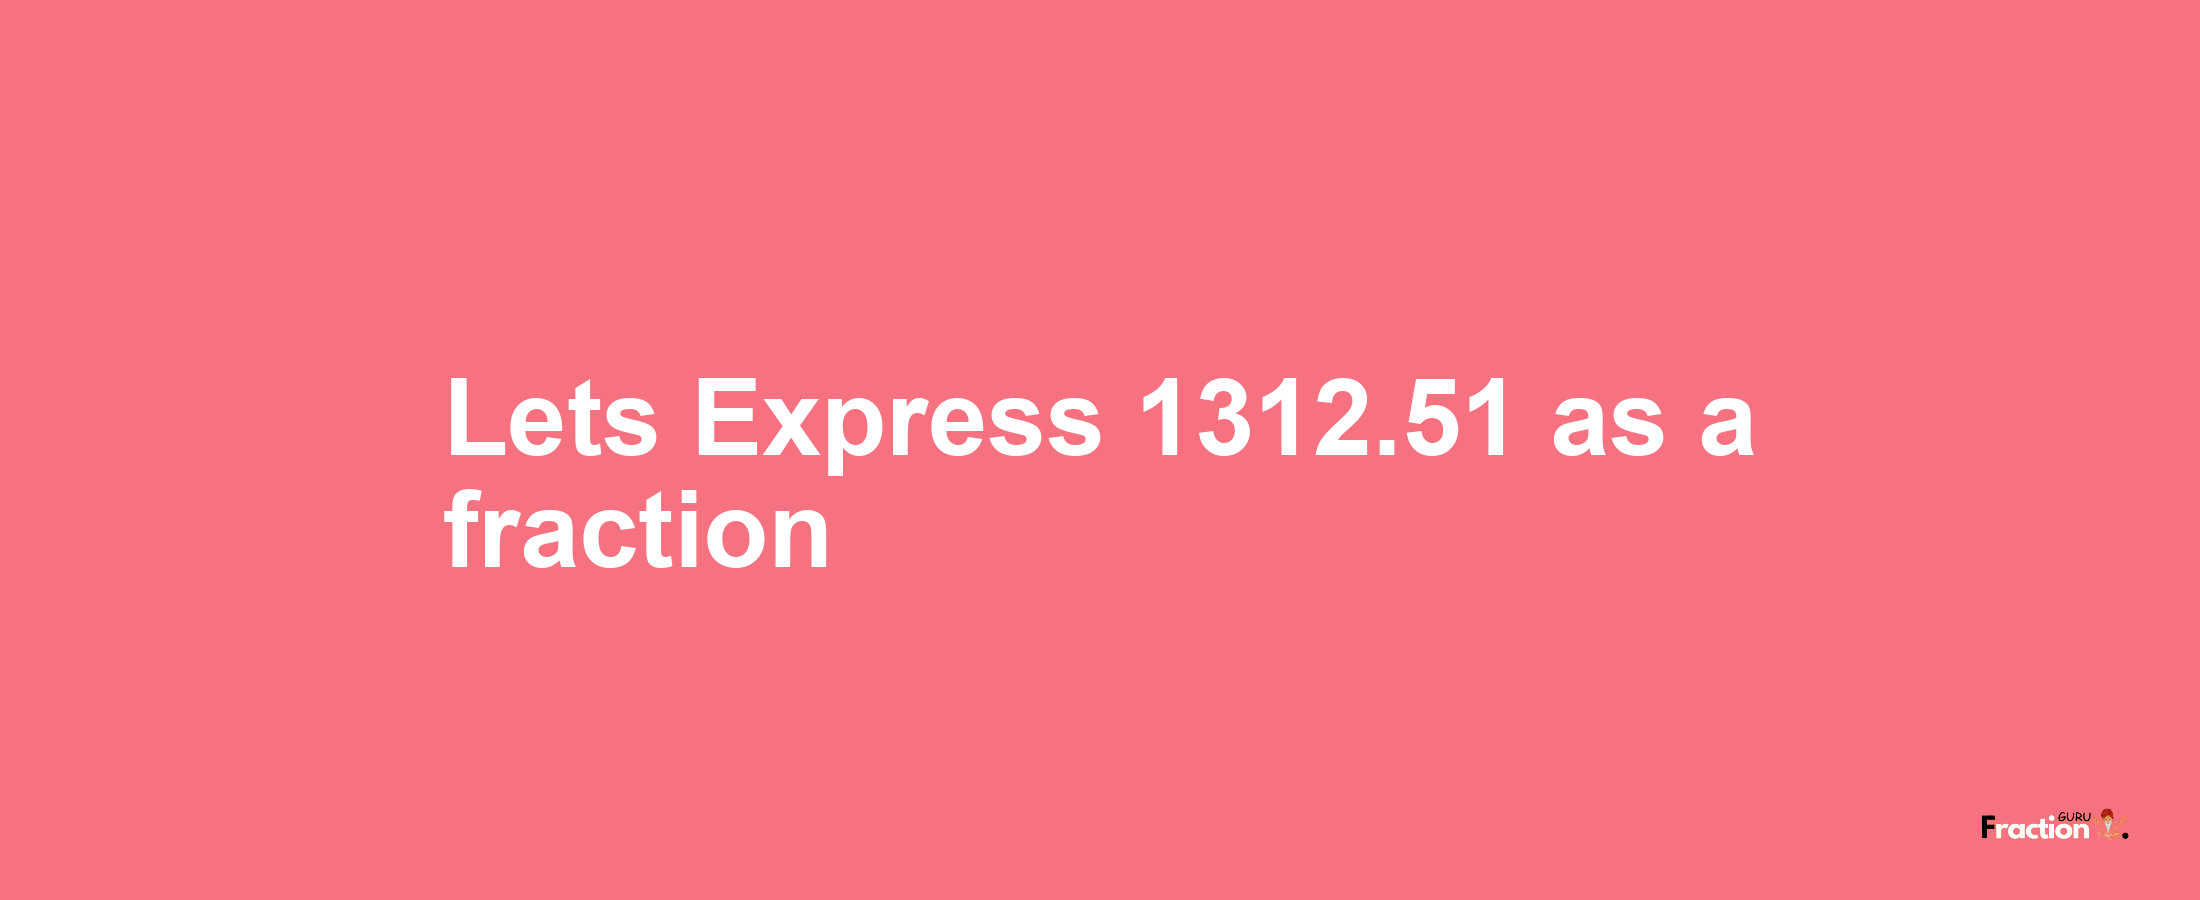 Lets Express 1312.51 as afraction